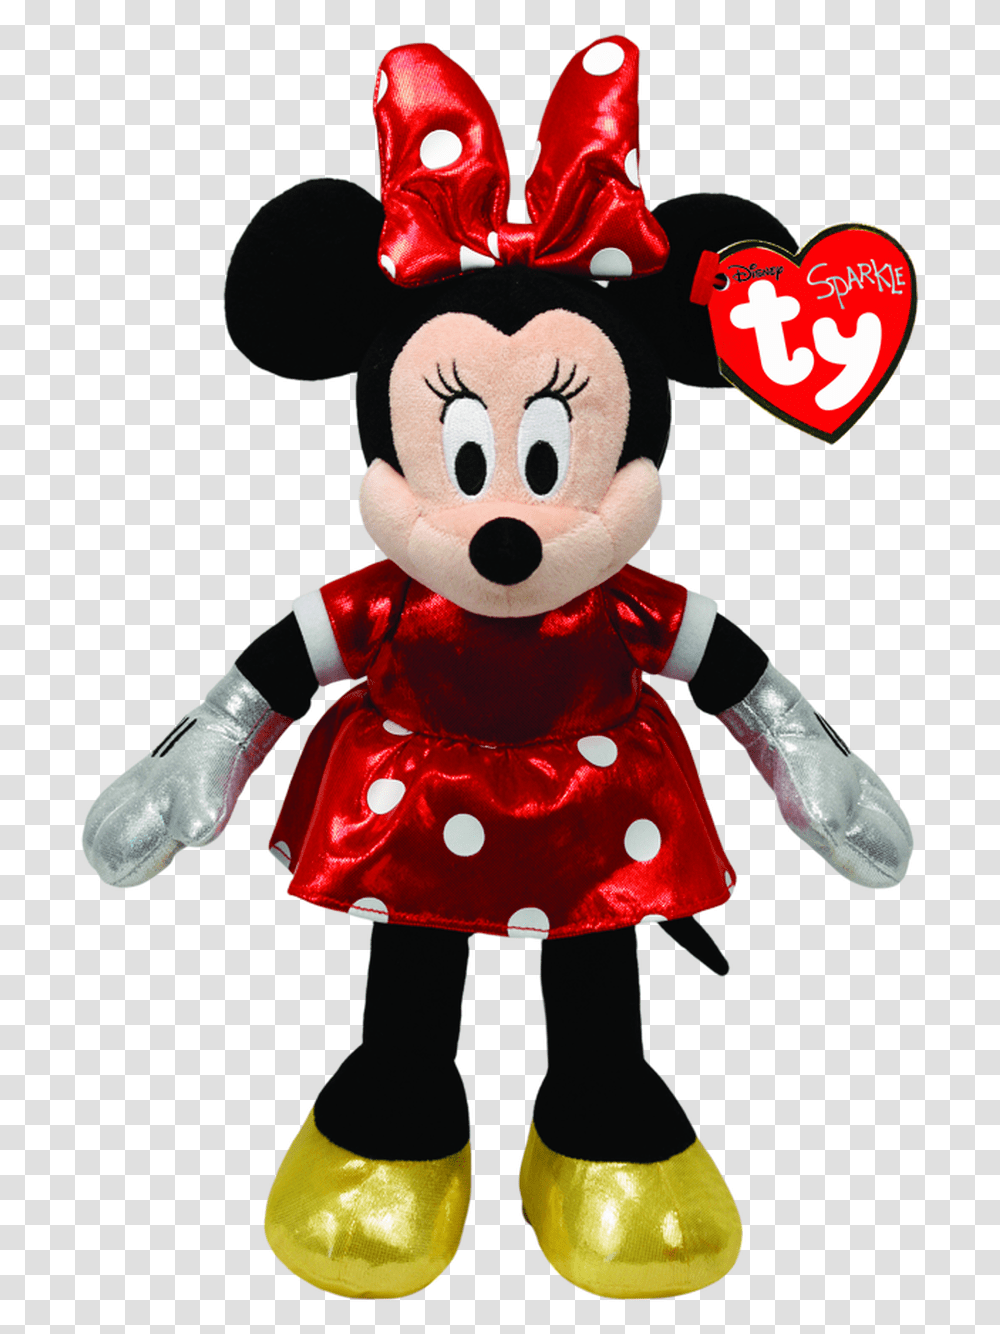 Minnie Mouse Red Sparkle Plush, Toy, Apparel, Doll Transparent Png